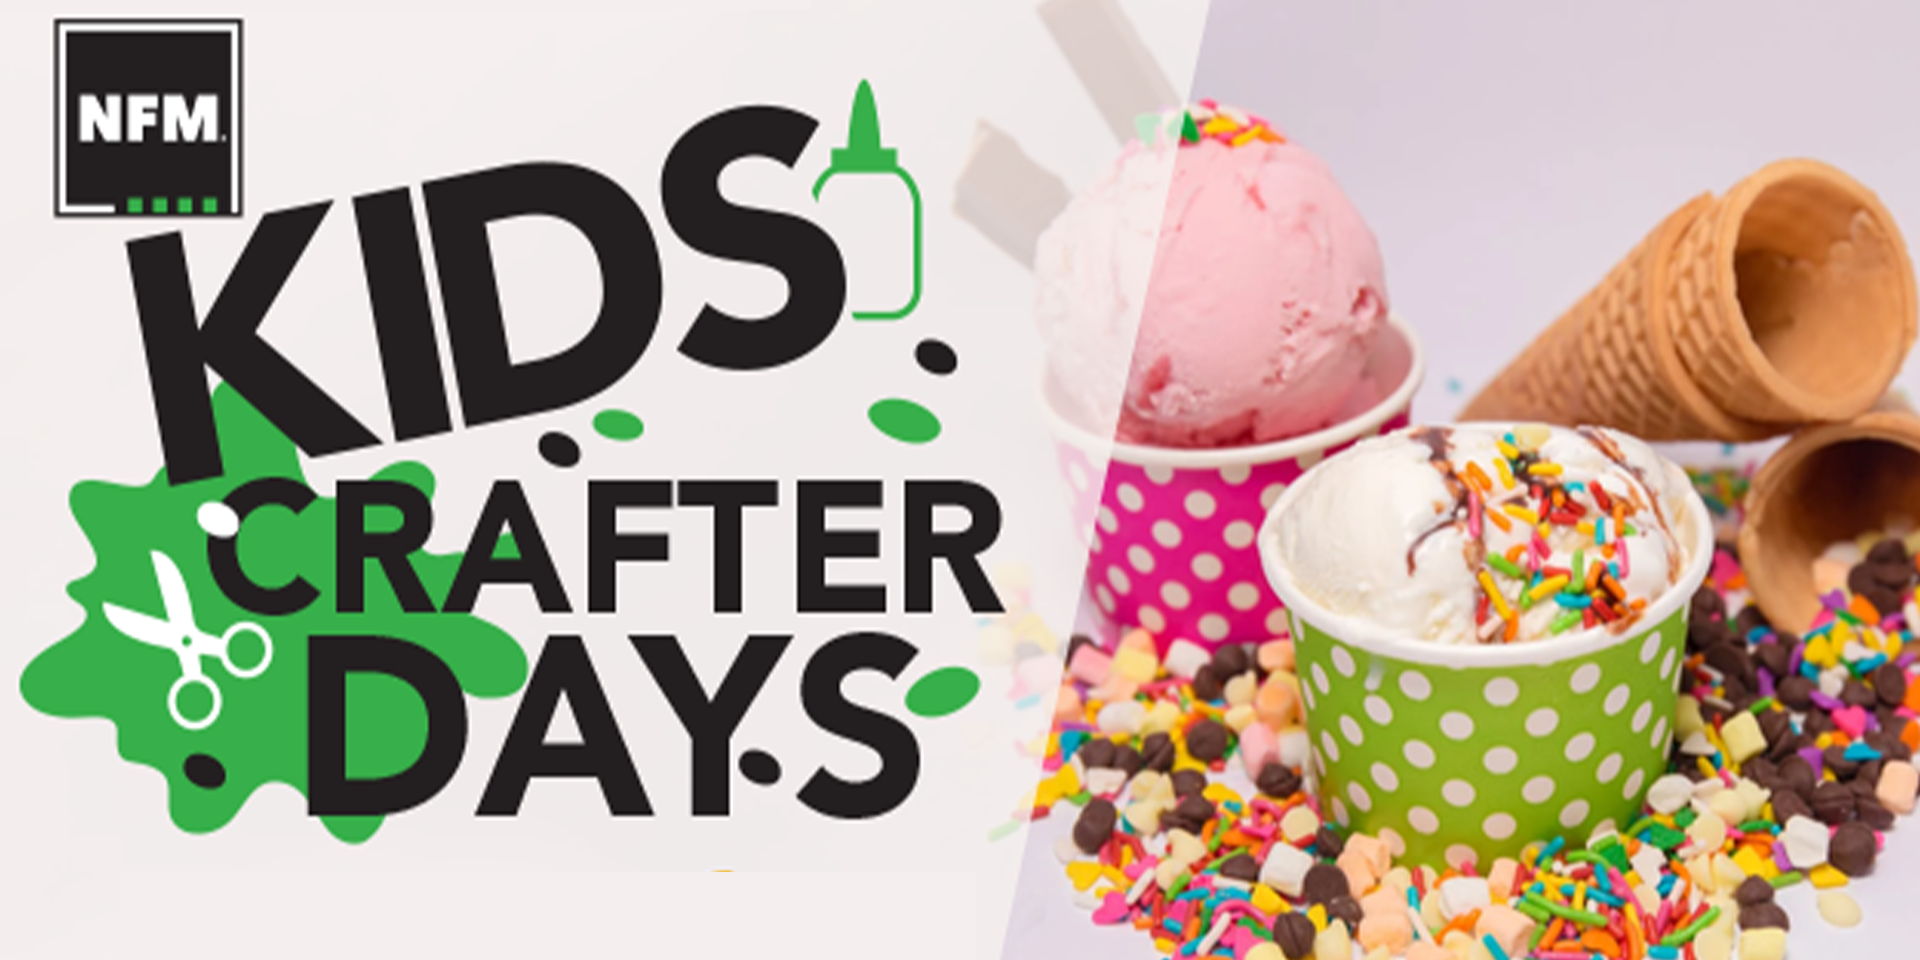 Kids Crafter Day  promotional image